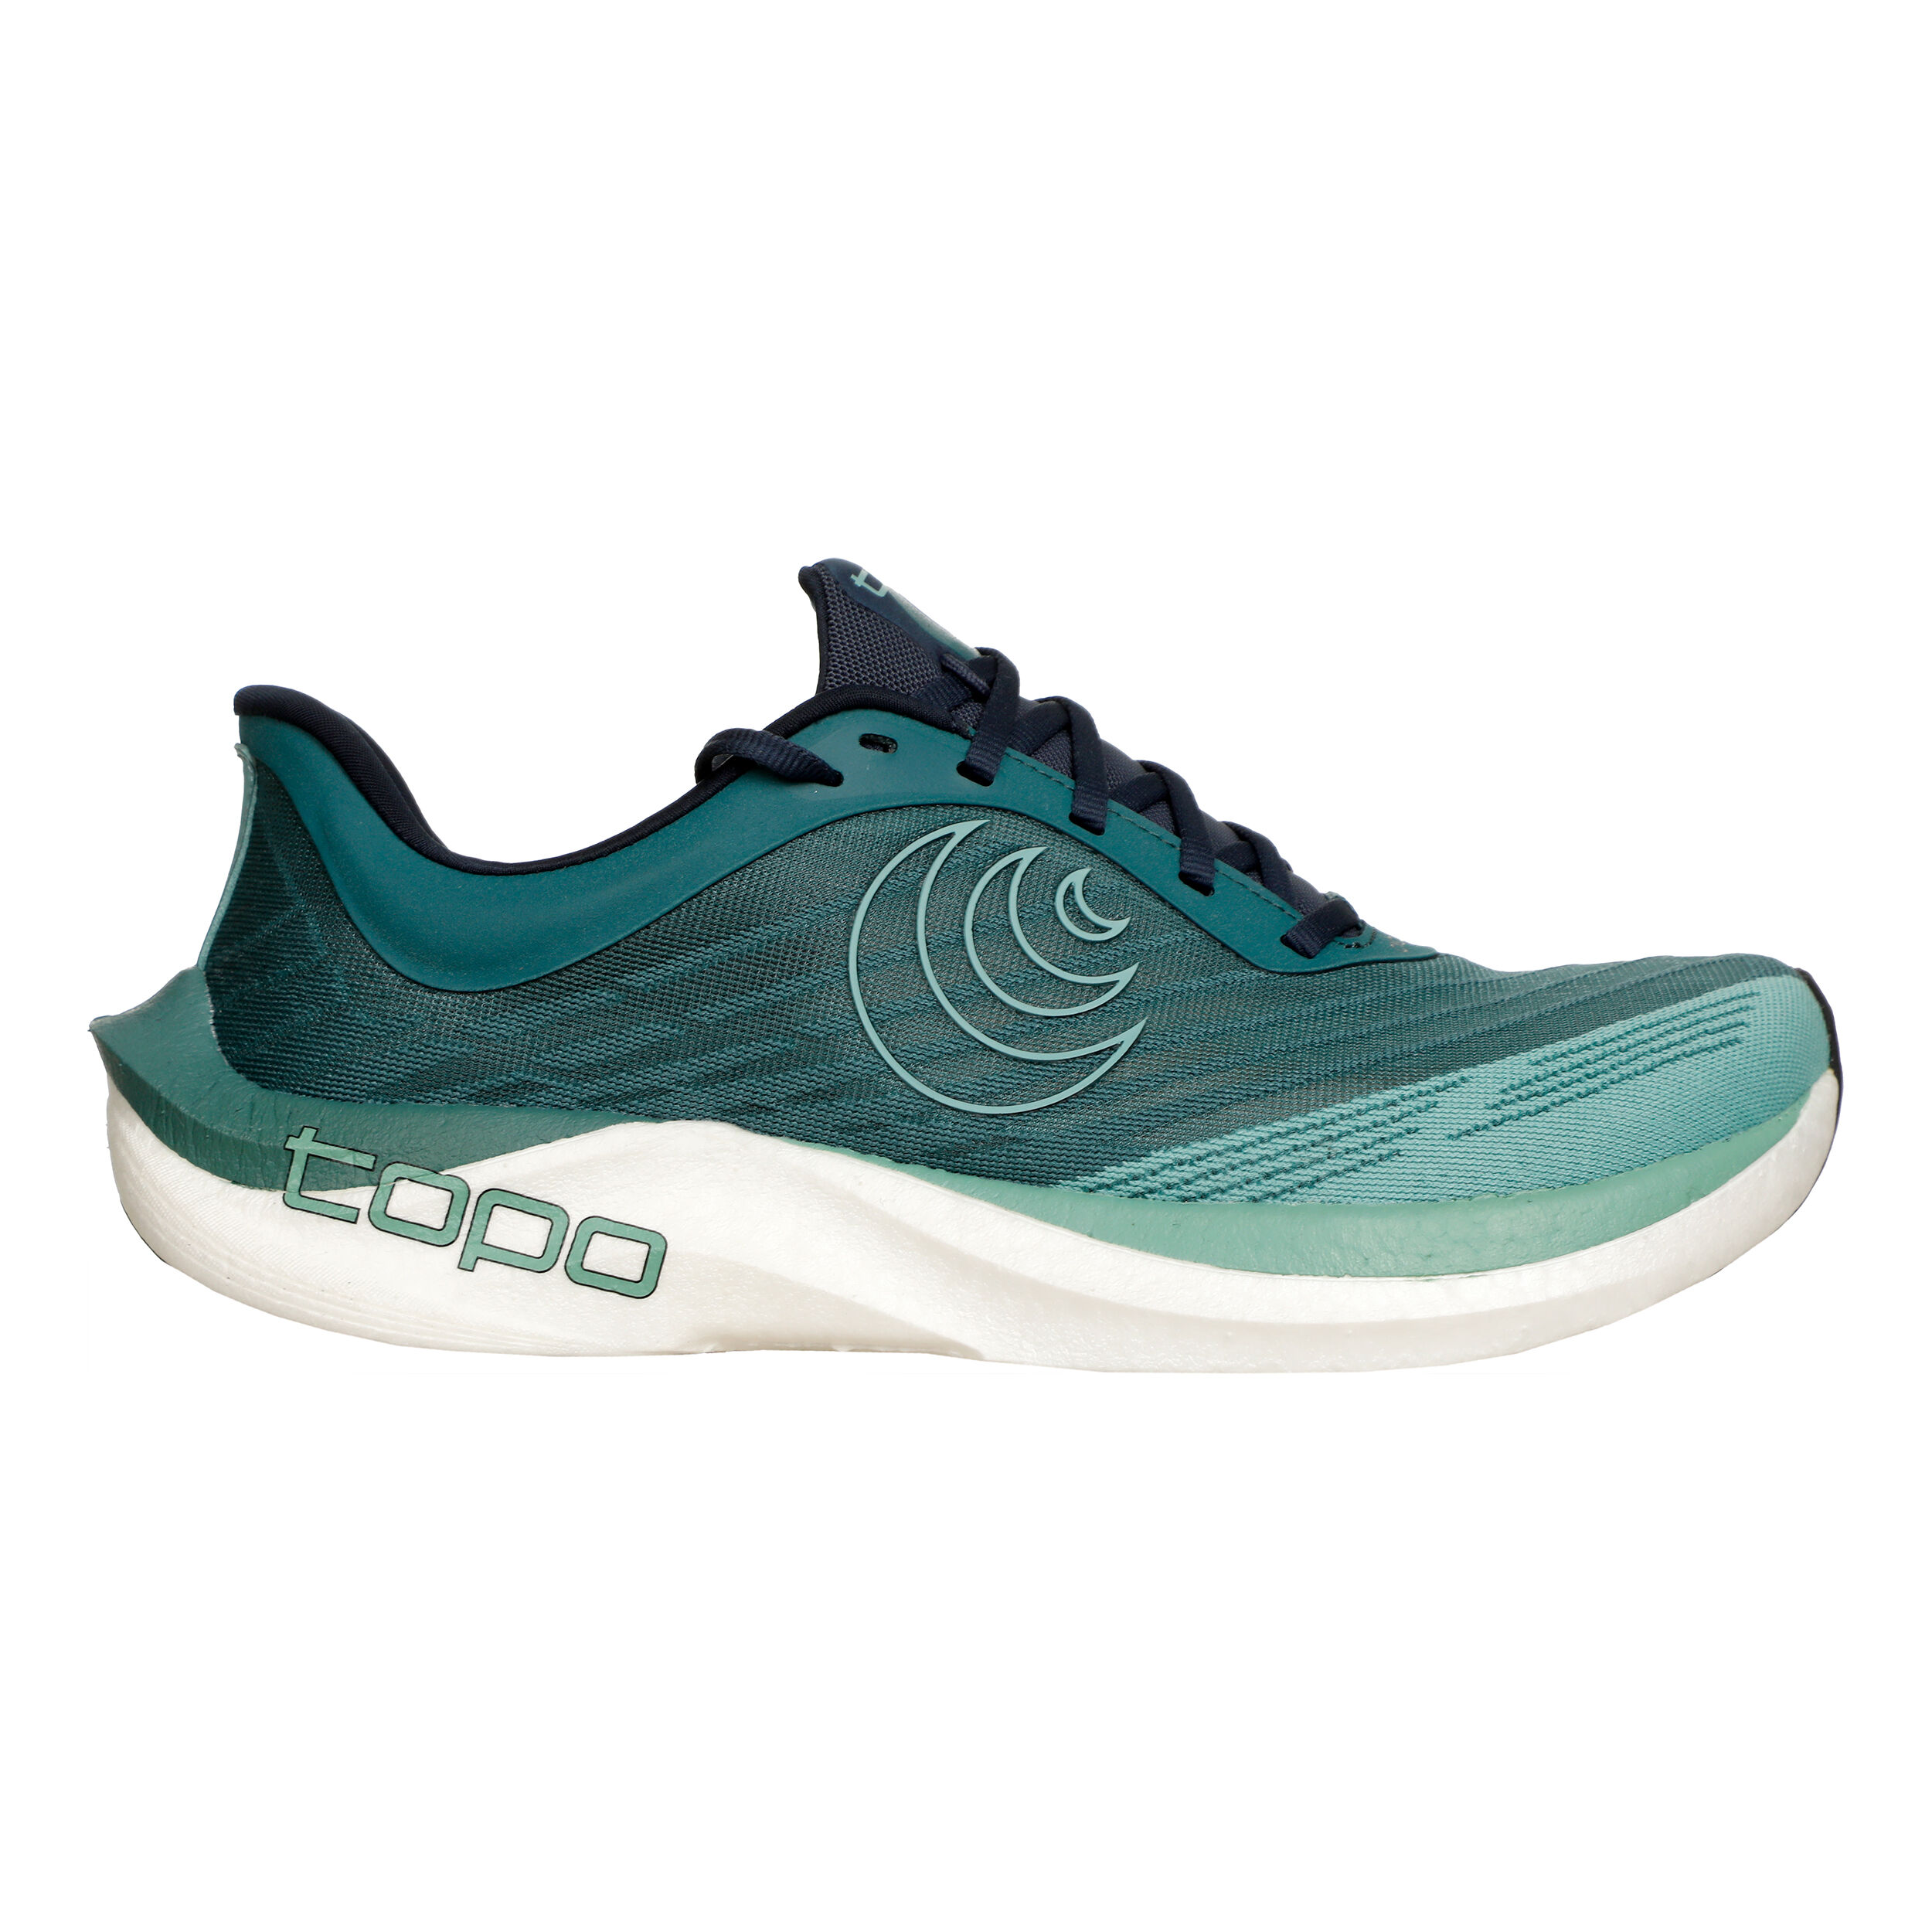 Buy TOPO ATHLETIC Cyclone 2 Neutral Running Shoe Women Blue, Mint ...